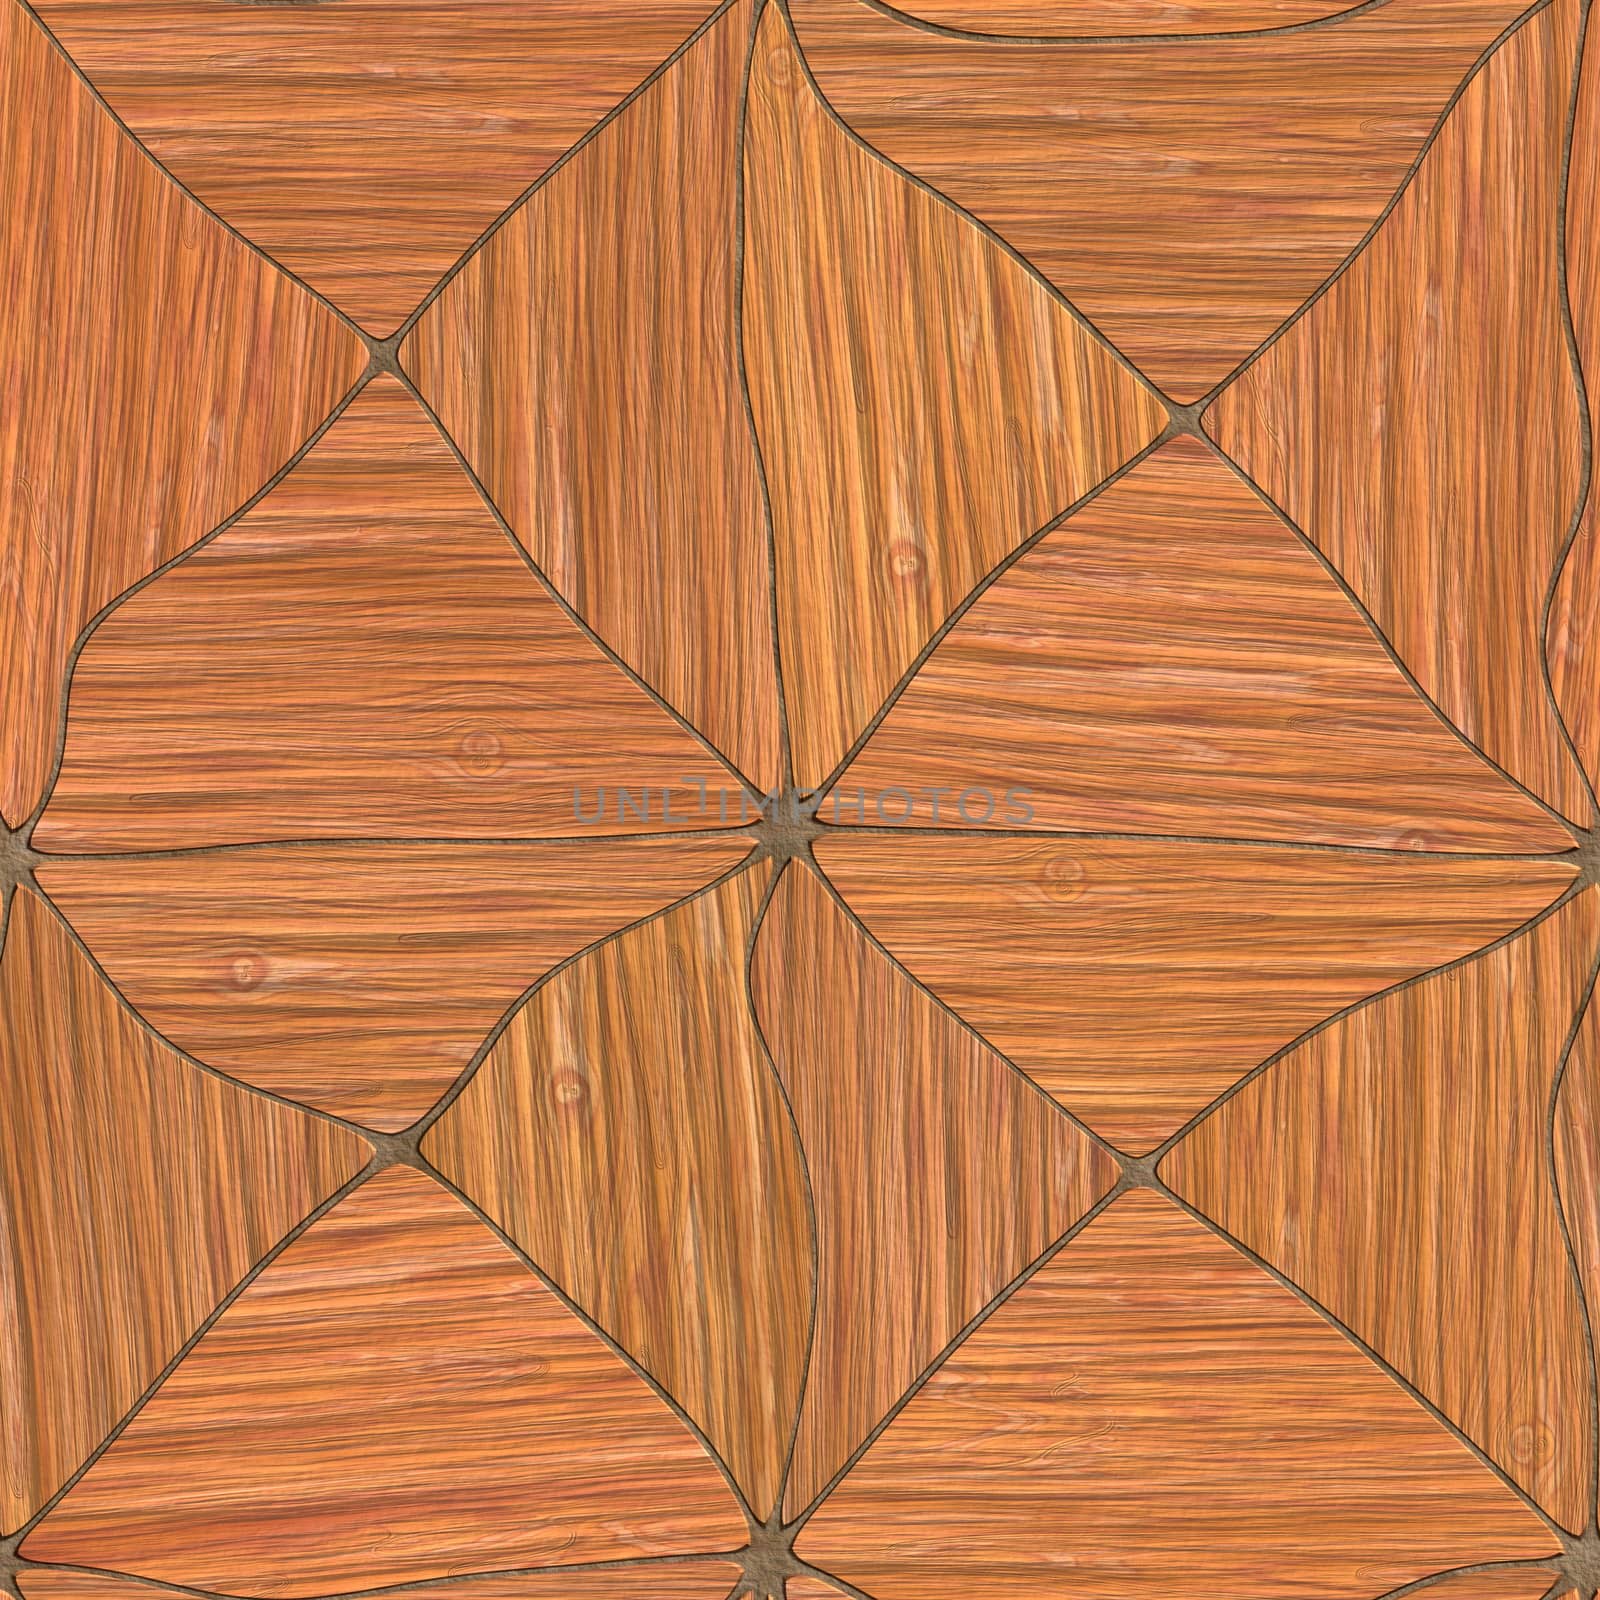 Irregular abstract seamless tileable wood background parquet pattern.